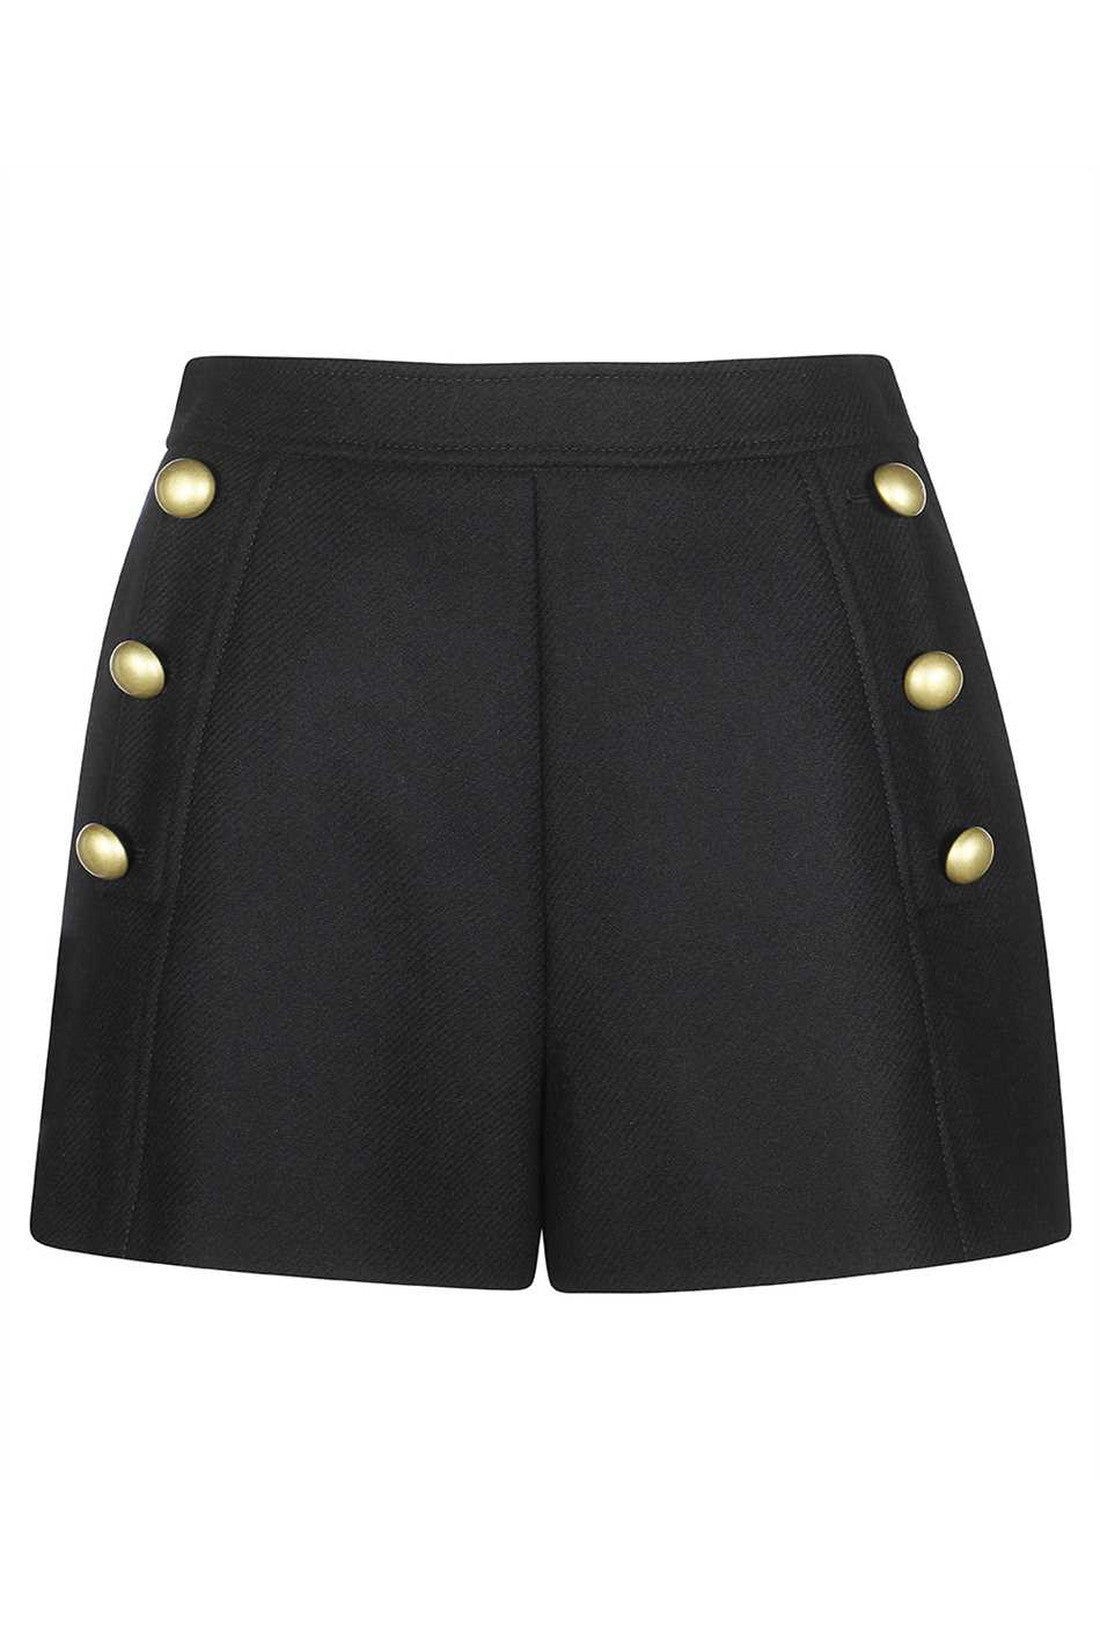 Wool shorts-Moschino-OUTLET-SALE-42-ARCHIVIST